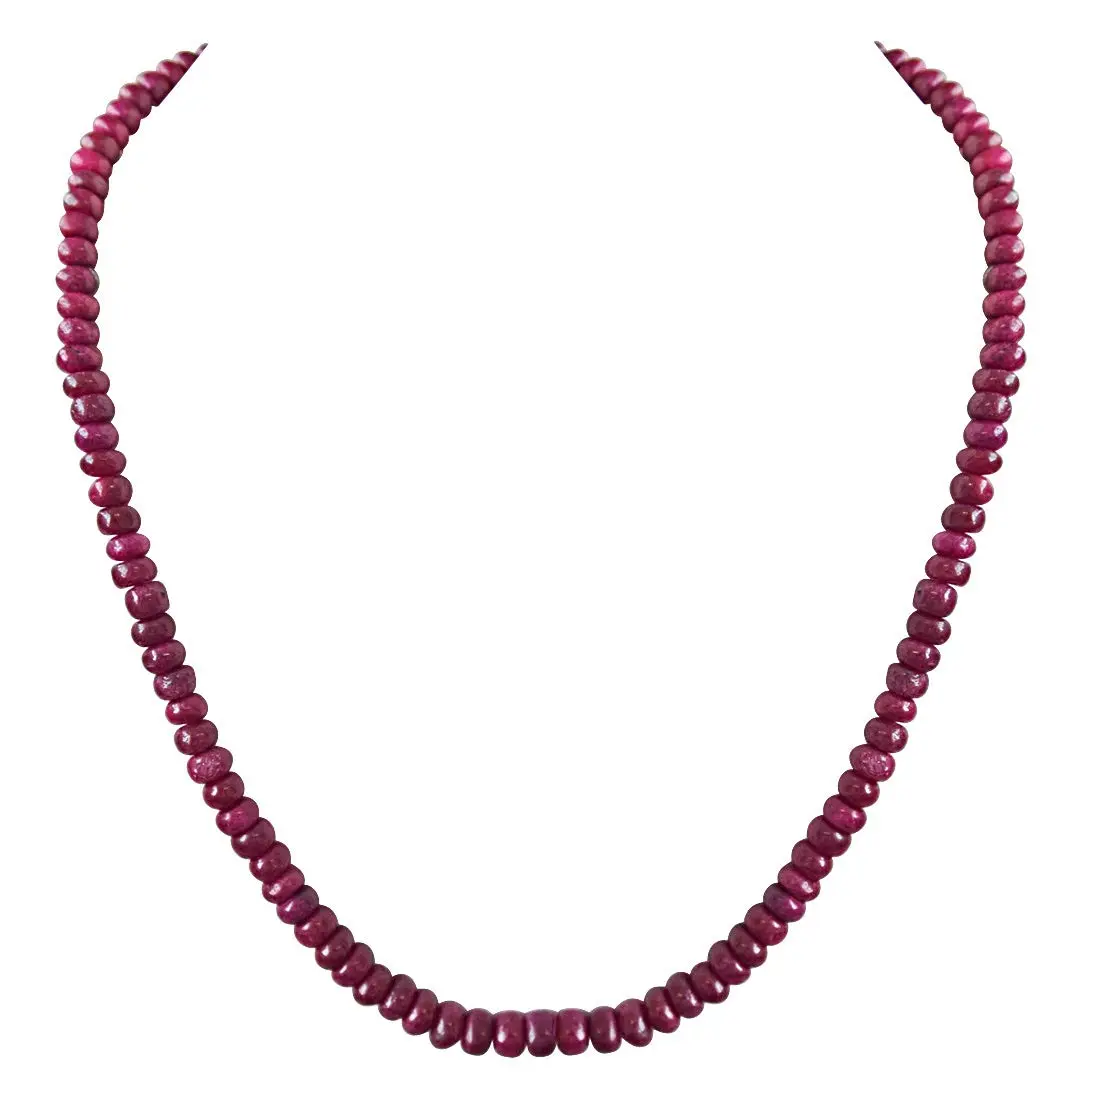 124cts Single Line Real Reddish Pink Ruby Beads Necklace for Women (124ctsRubyNeck)